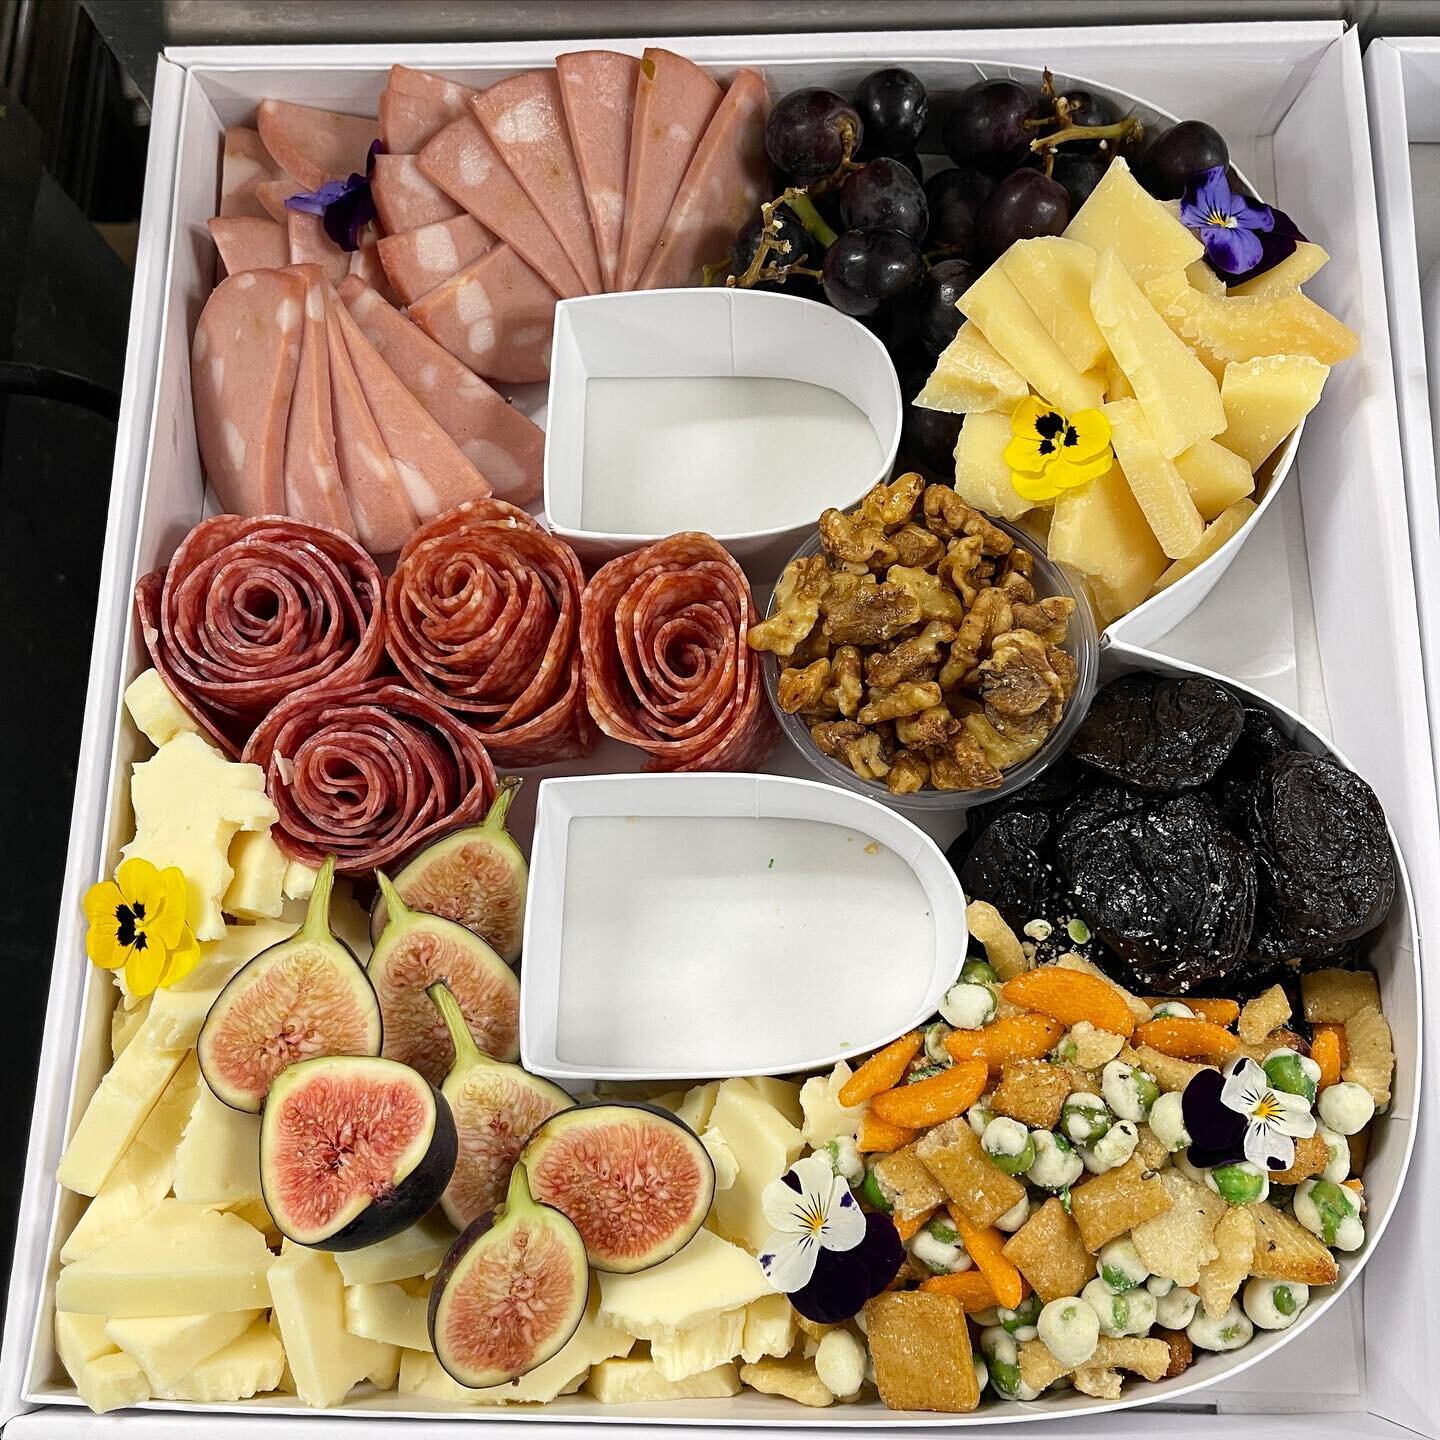 A client came in with a custom charcuterie request and of course we accommodated. These fun charcuterie filled letters for graduation were a huge hit! No matter what your catering needs are, we can accommodate.

Call or email today!
 
(203)-269-9266
